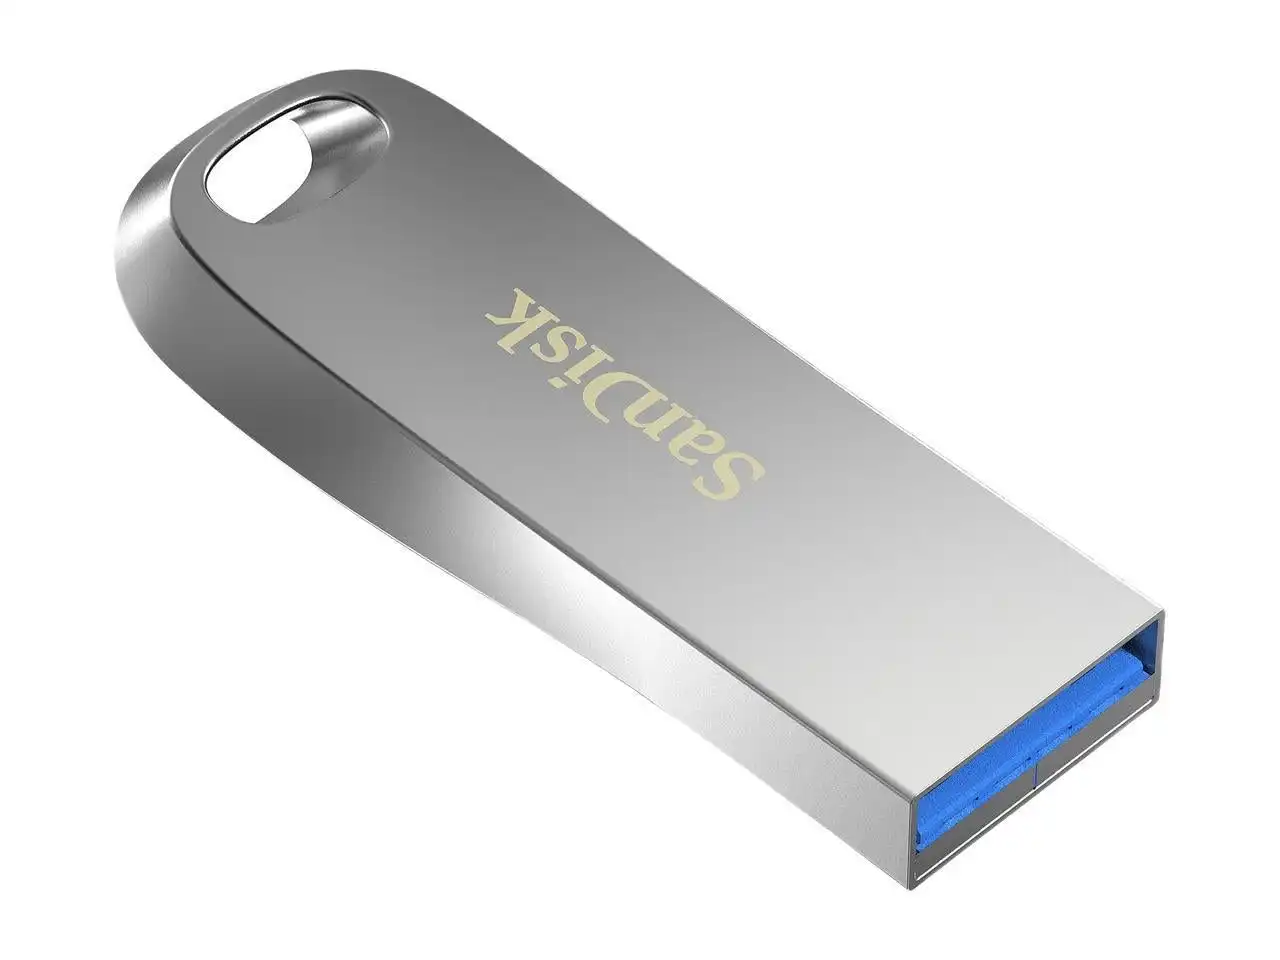 Sandisk Sdcz74 064g G46 64g  Ultra Luxe Pen Drive 150mb Usb 3.0 Metal